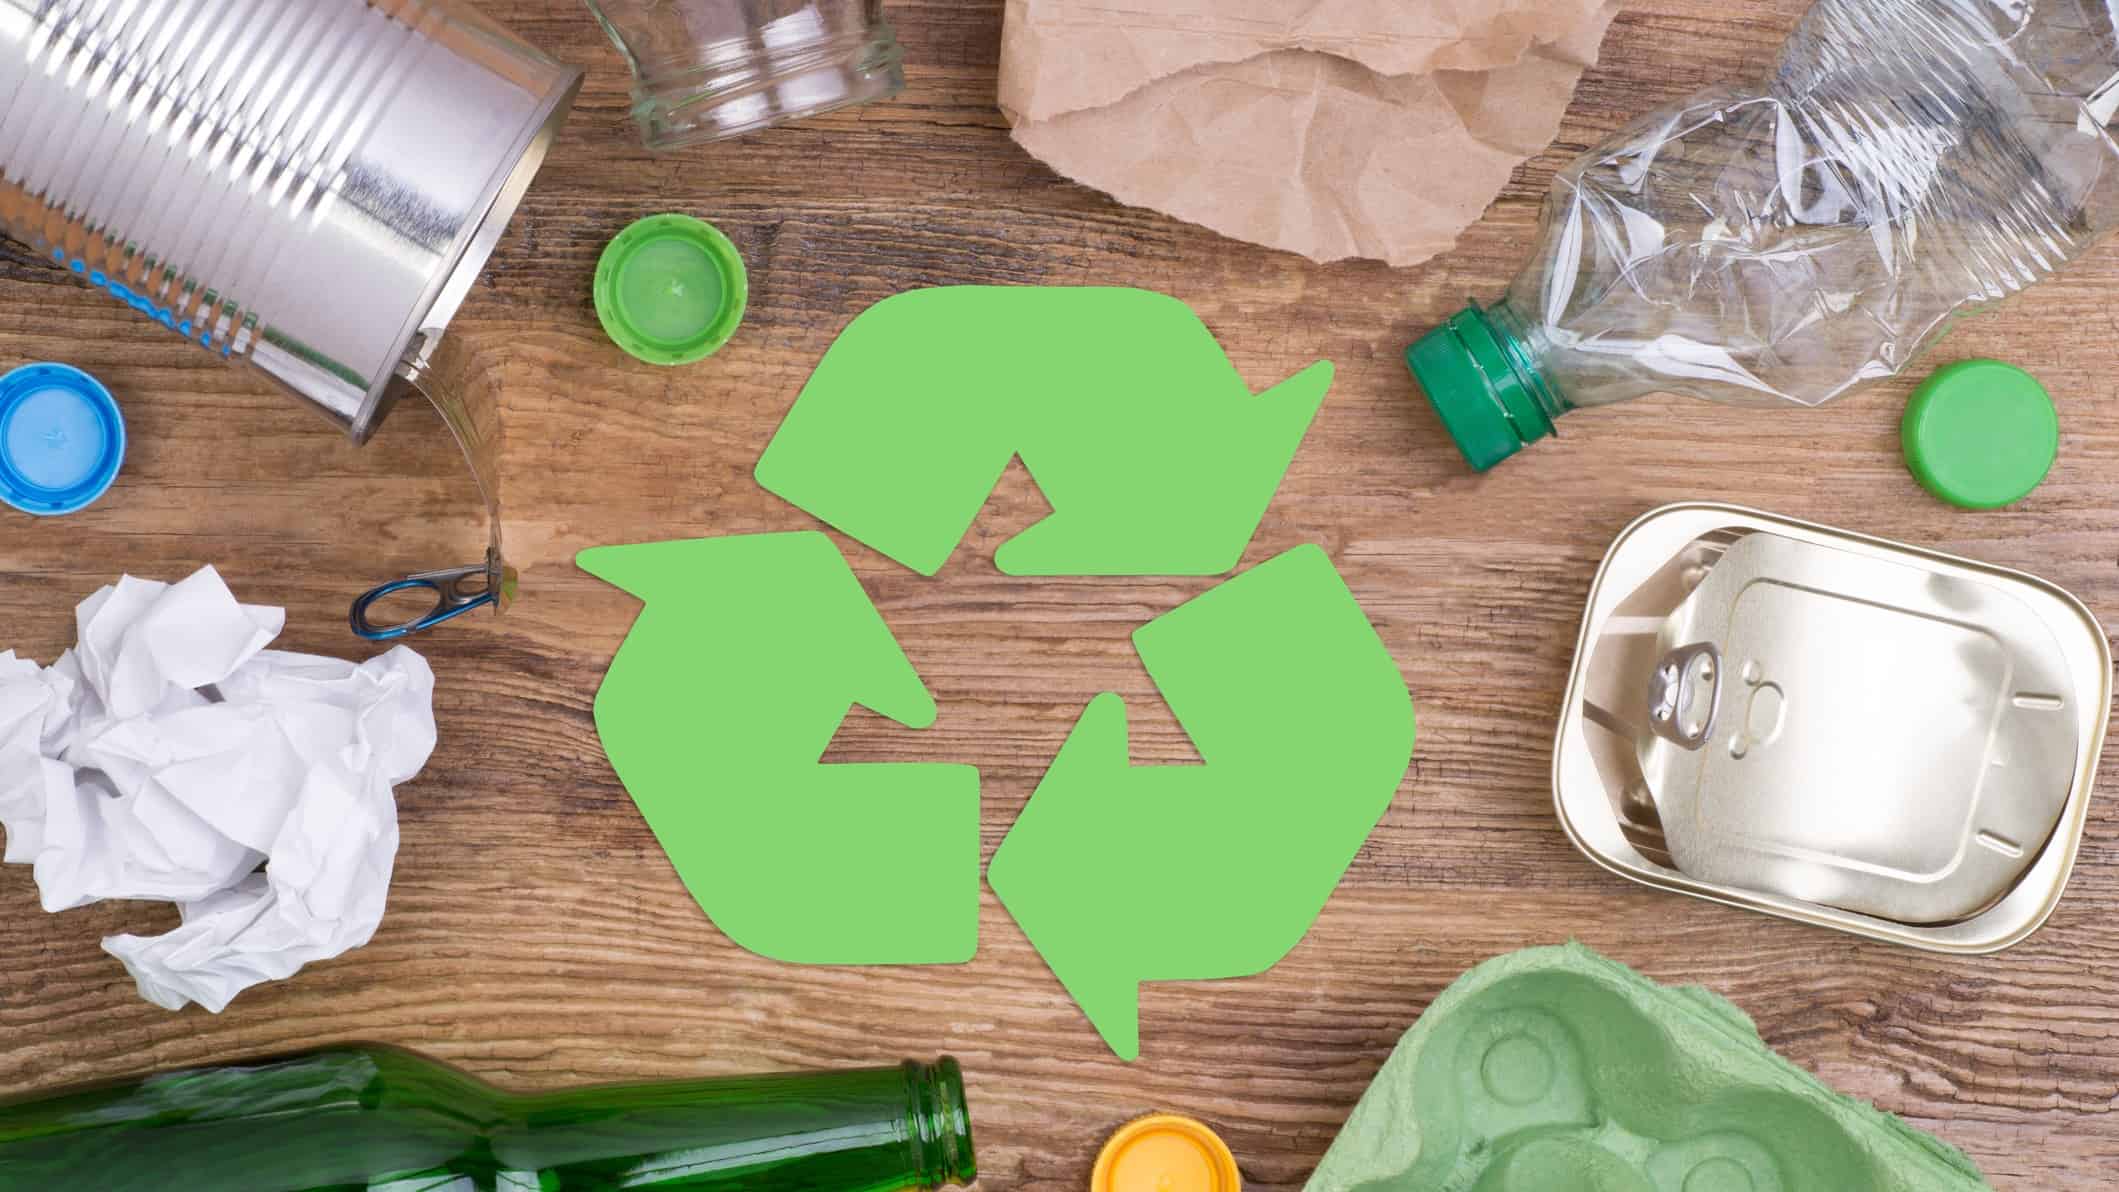 Rubbish and waste around a green recycling logo.